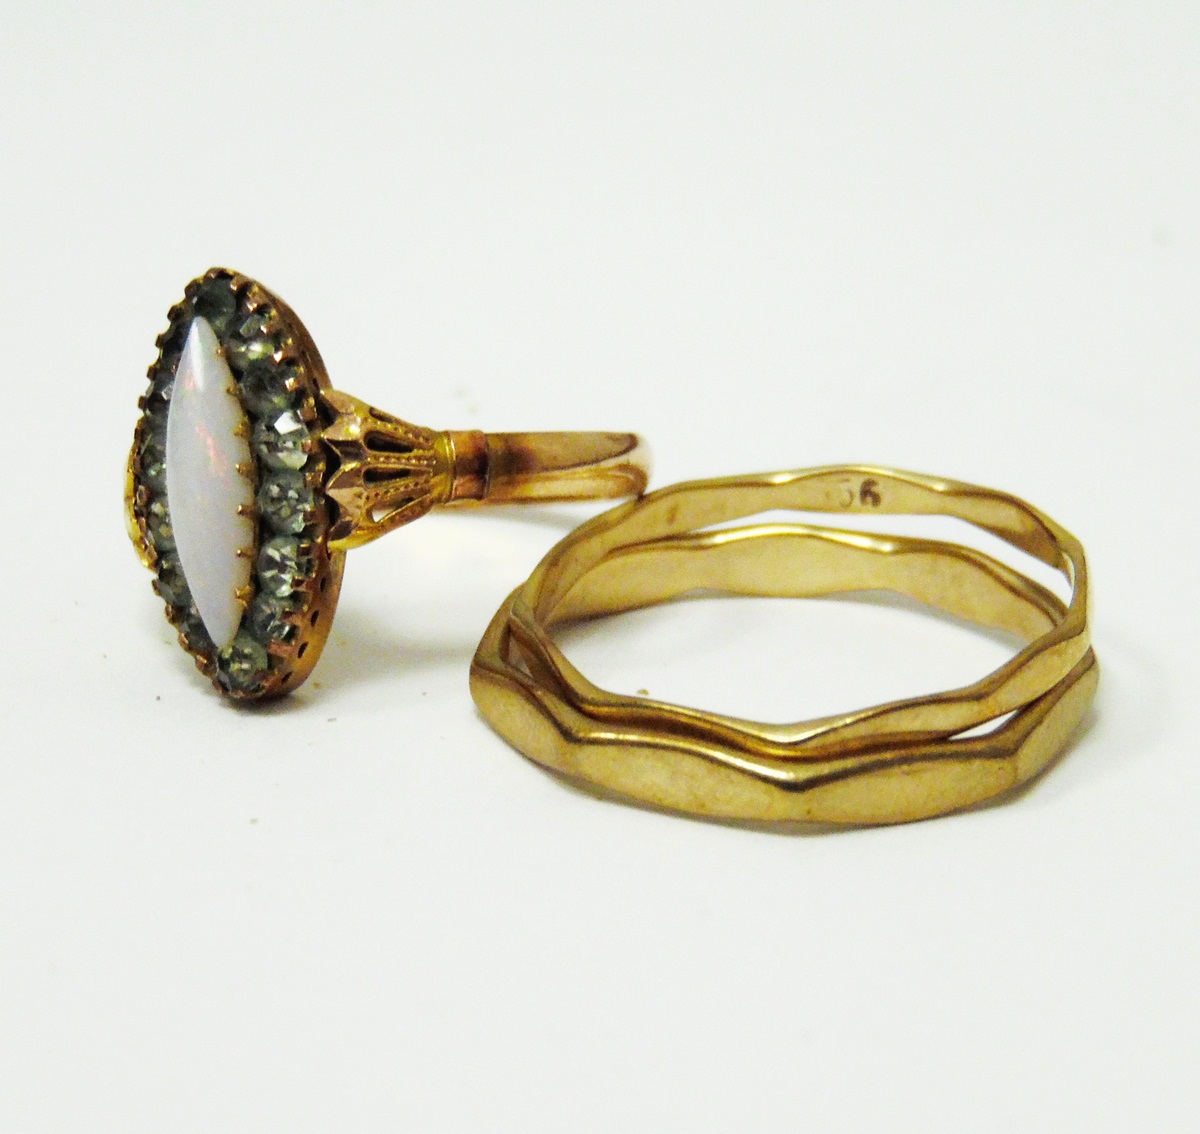 18ct gold wedding ring, 4.8g approx. - Image 2 of 2